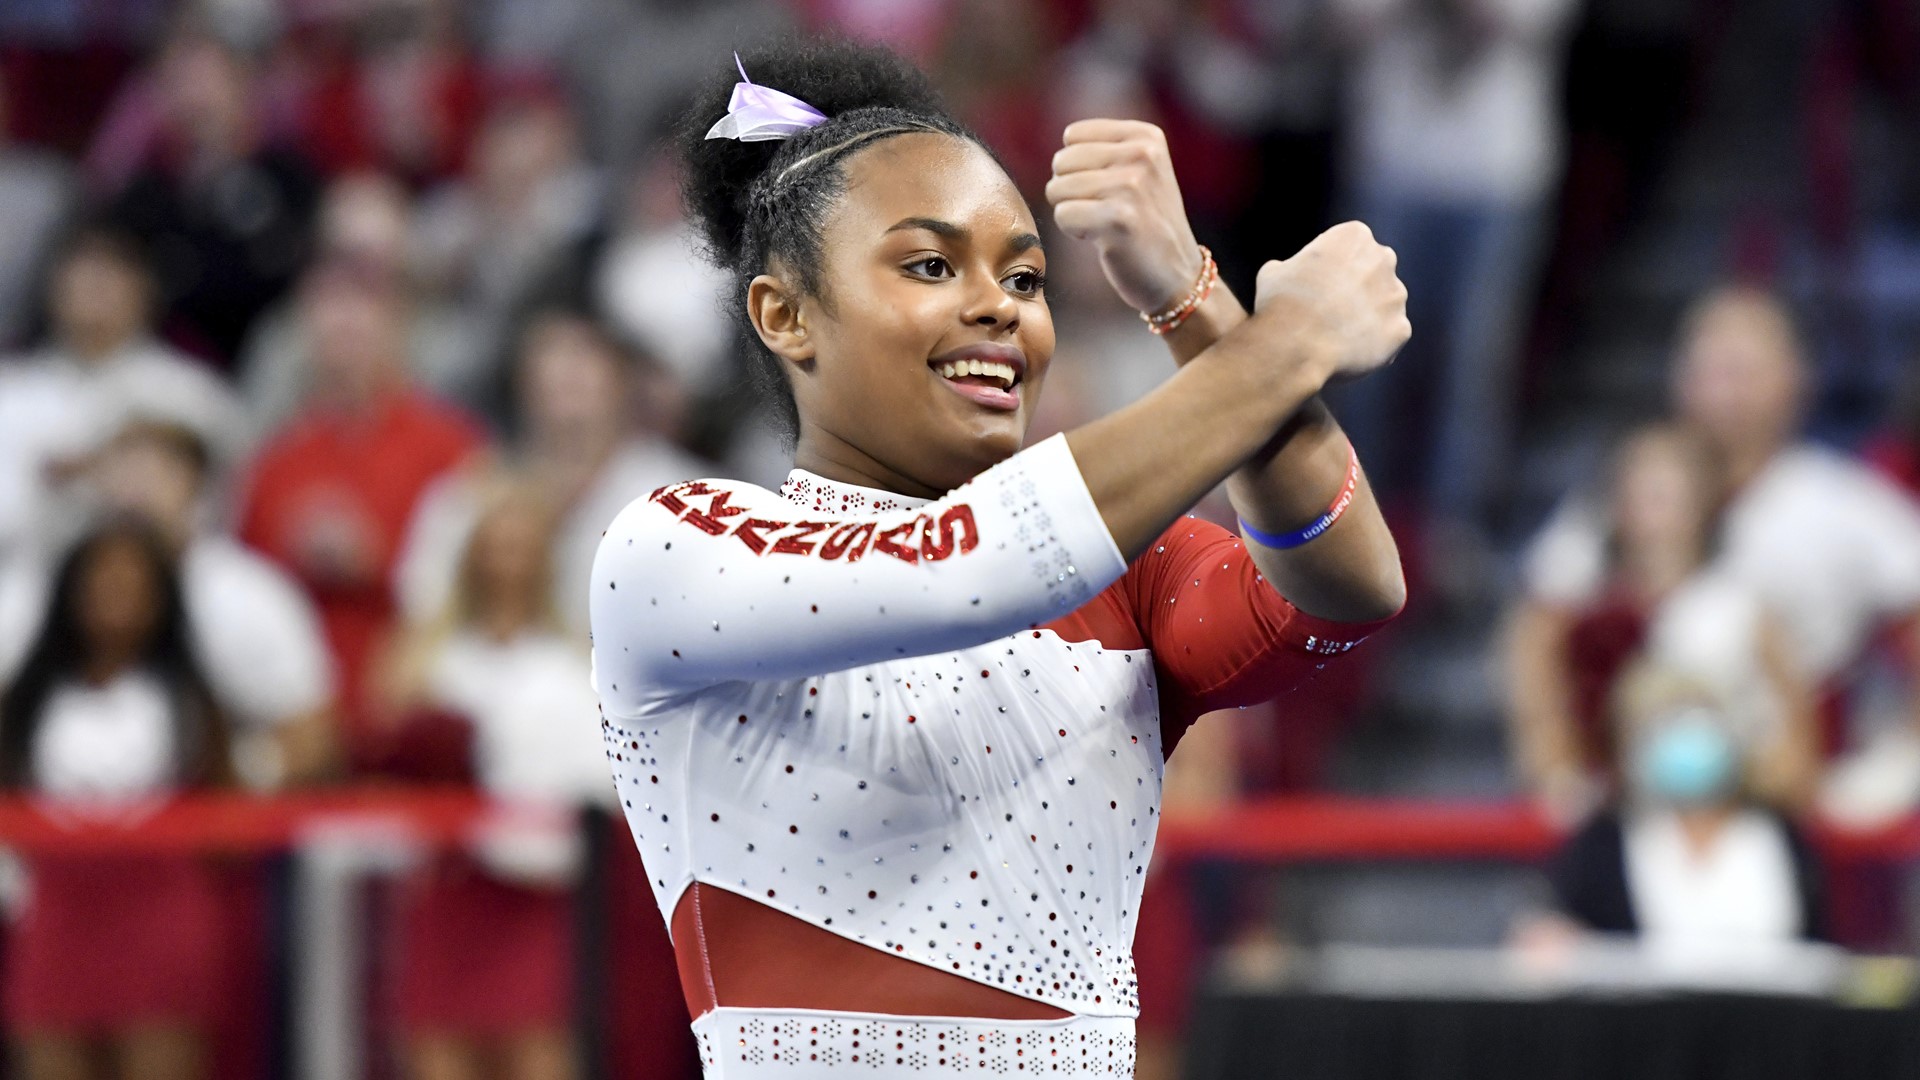 Leah Smith and Frankie Price are hoping to inspire young gymnasts of color in a sport that is mostly white in the United States